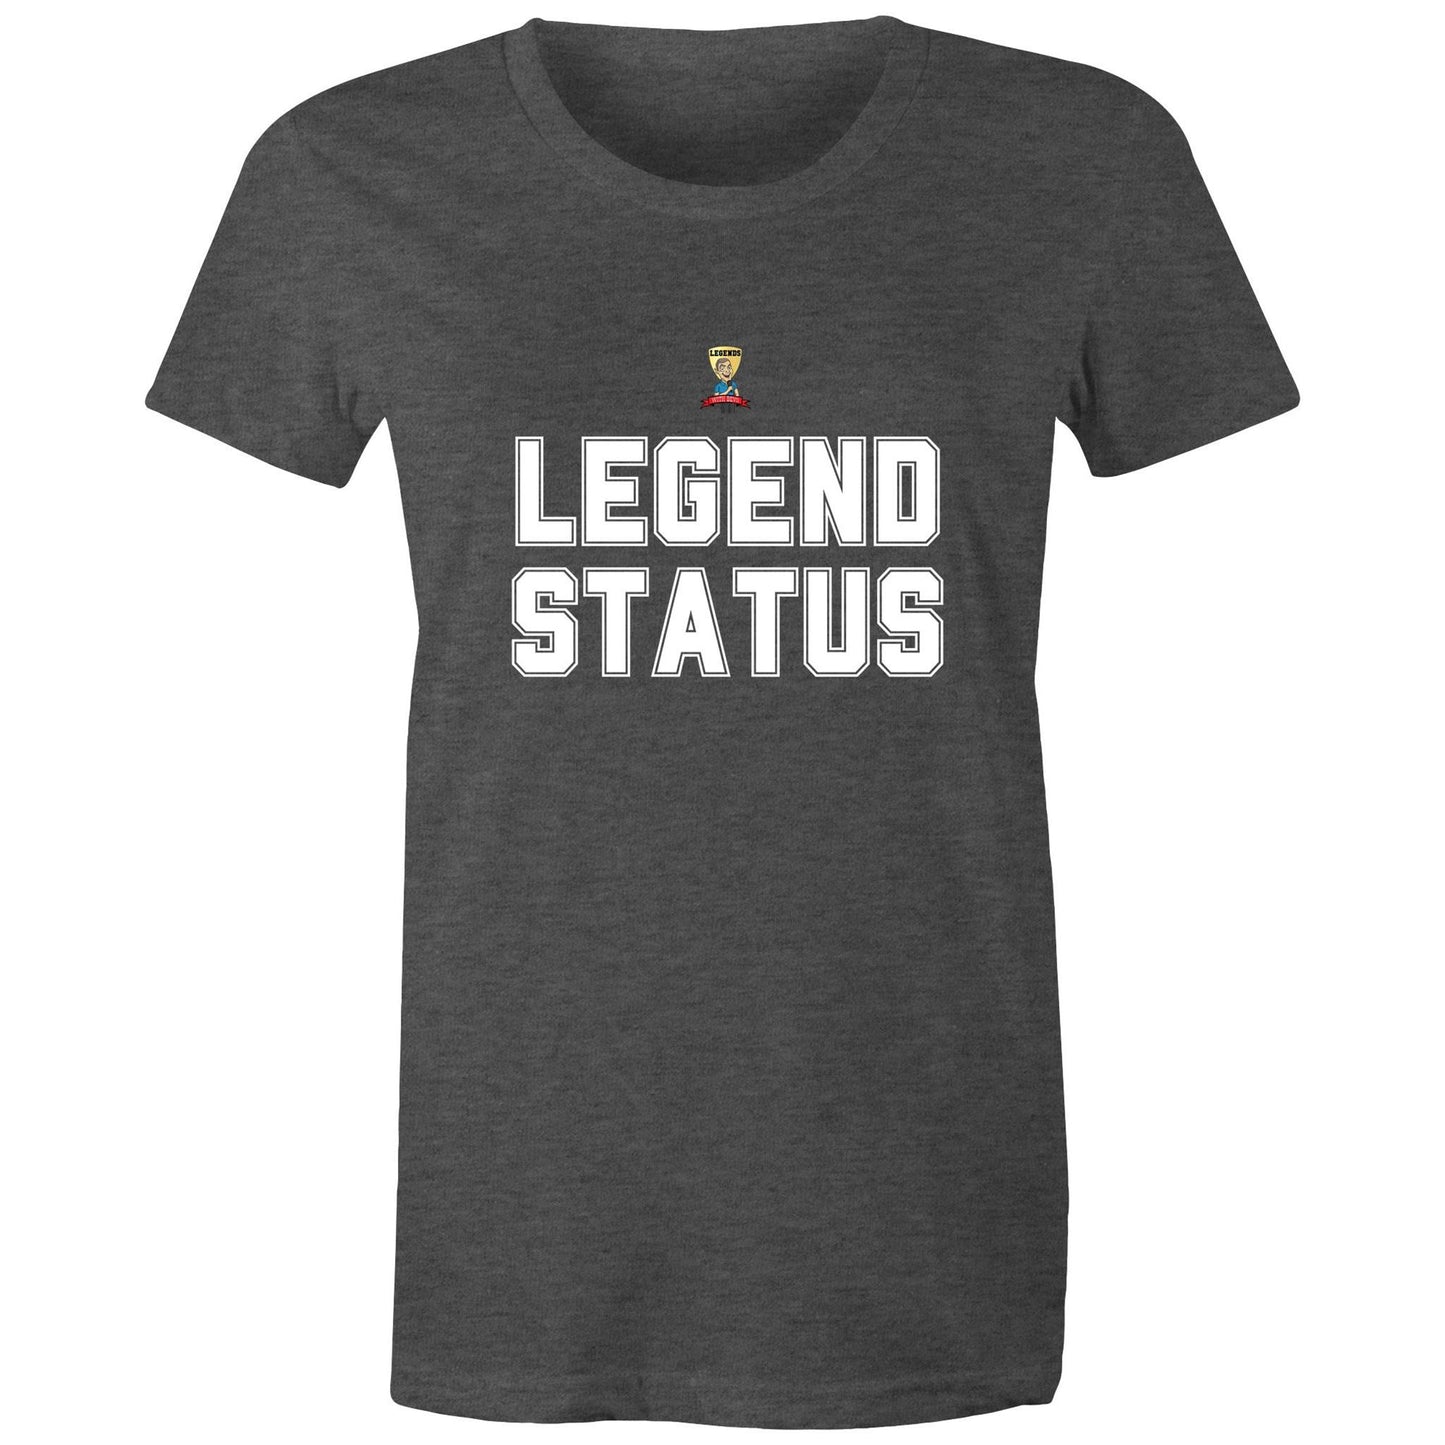 "LEGEND STATUS" Legends With Bevo - AS Colour - Women's Maple Tee